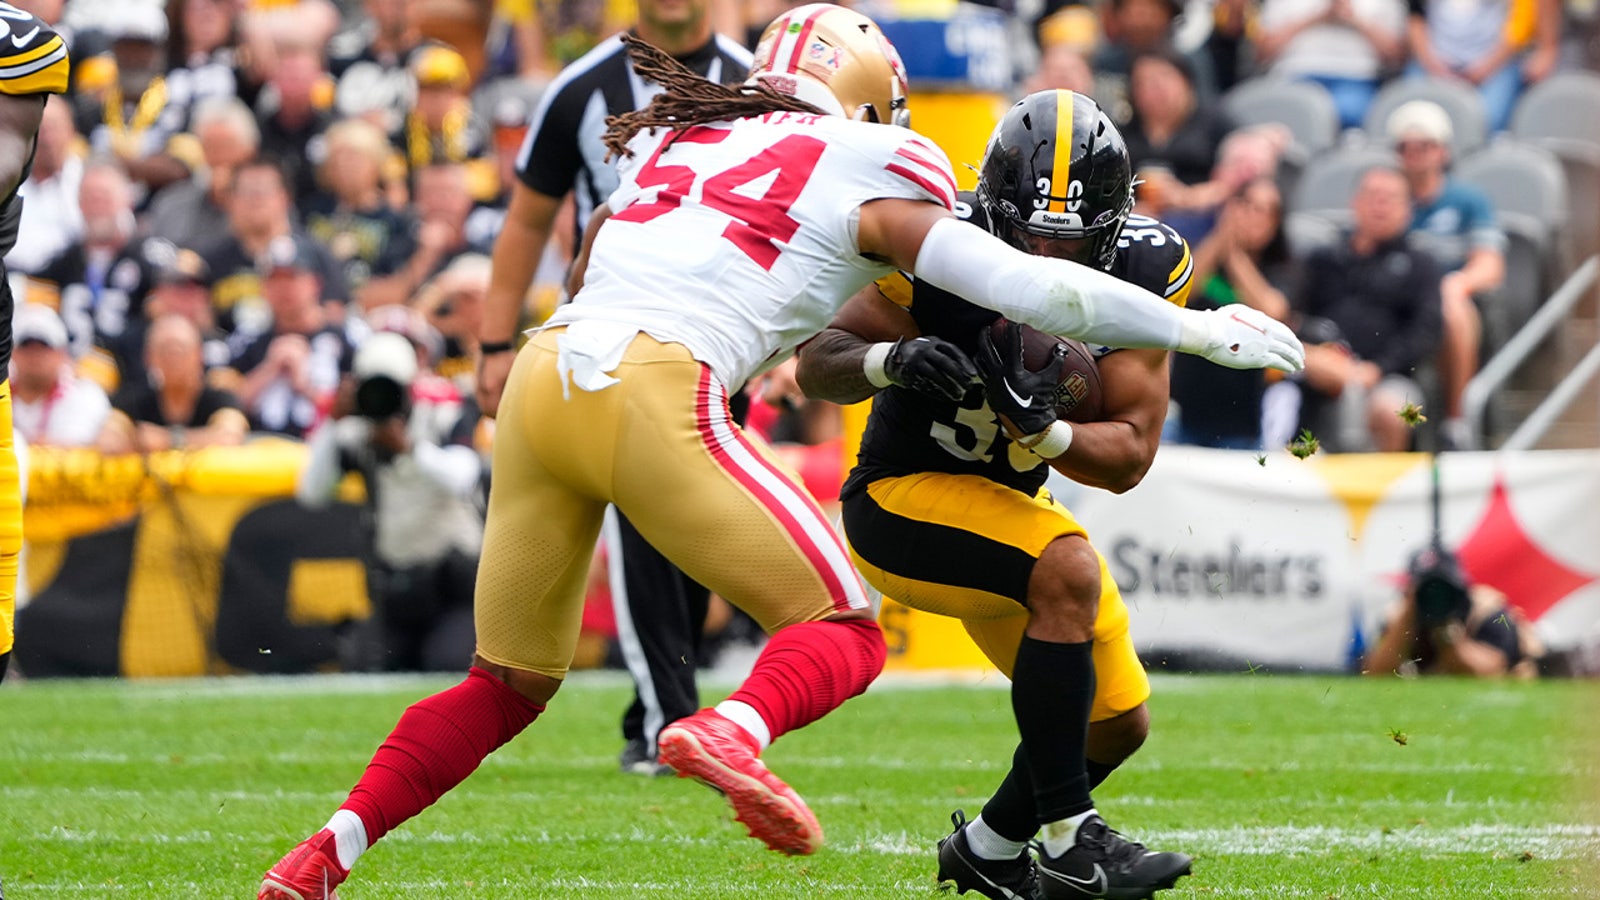 49ers' defense dominates in blowout victory over Steelers